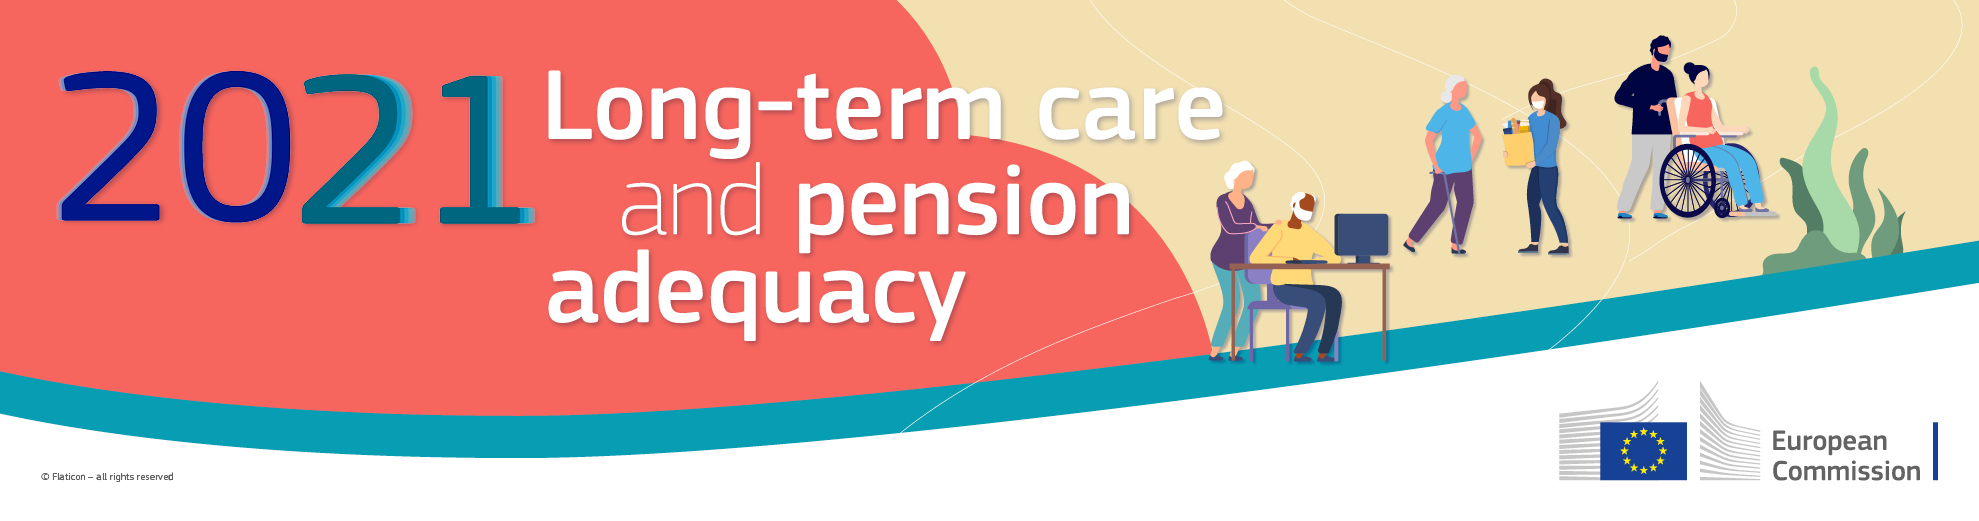 Long-Term Care and Pension Adequacy in an Ageing Society